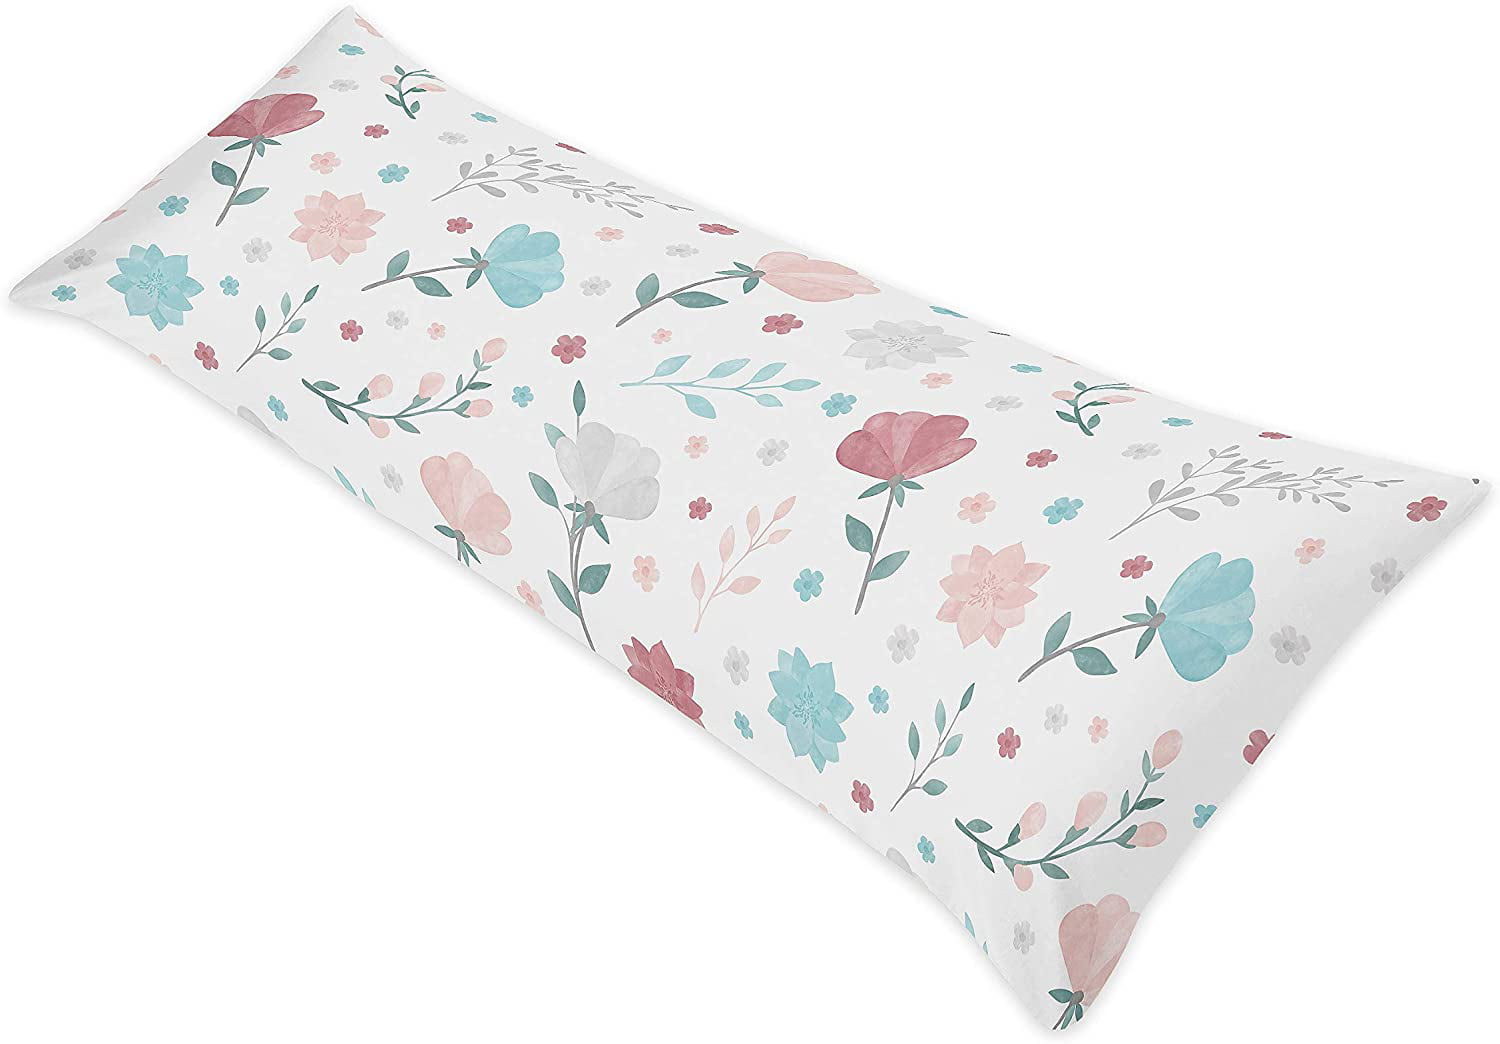 Grey Pink Shabby Chic Watercolor Floral Body Pillow Case Cover by Sweet Jojo 